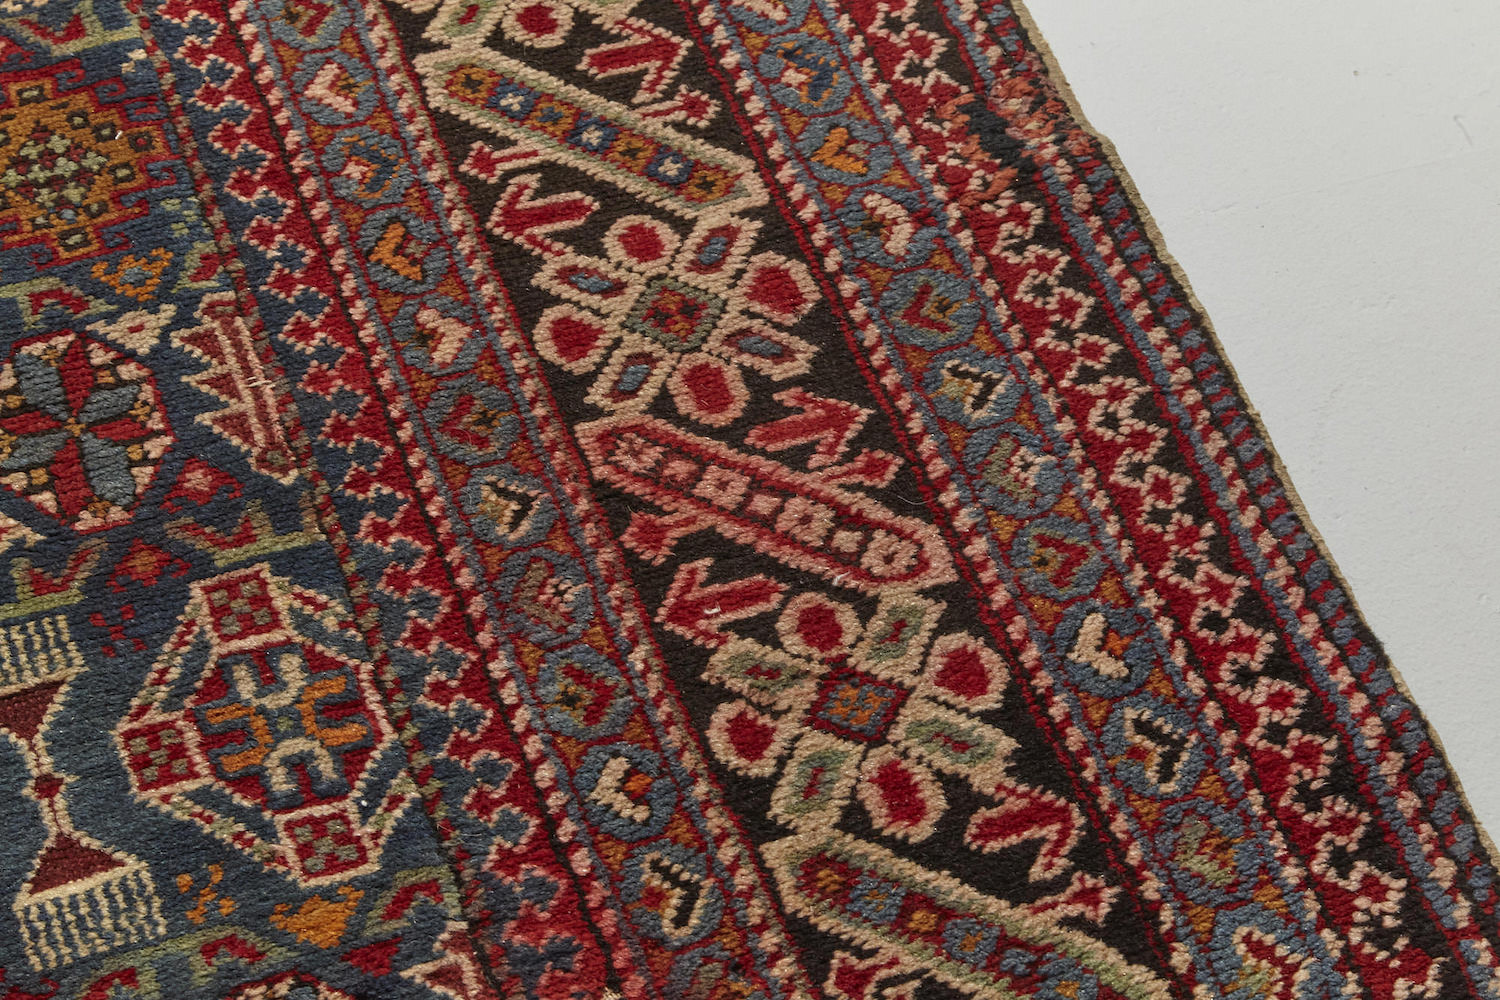 Border detail of Chi chi antique Persian Rug runner with blue, red and cream designs intricately hand woven throughout, perfect for a hallway, living room or study - Available from King Kennedy Rugs Los Angeles